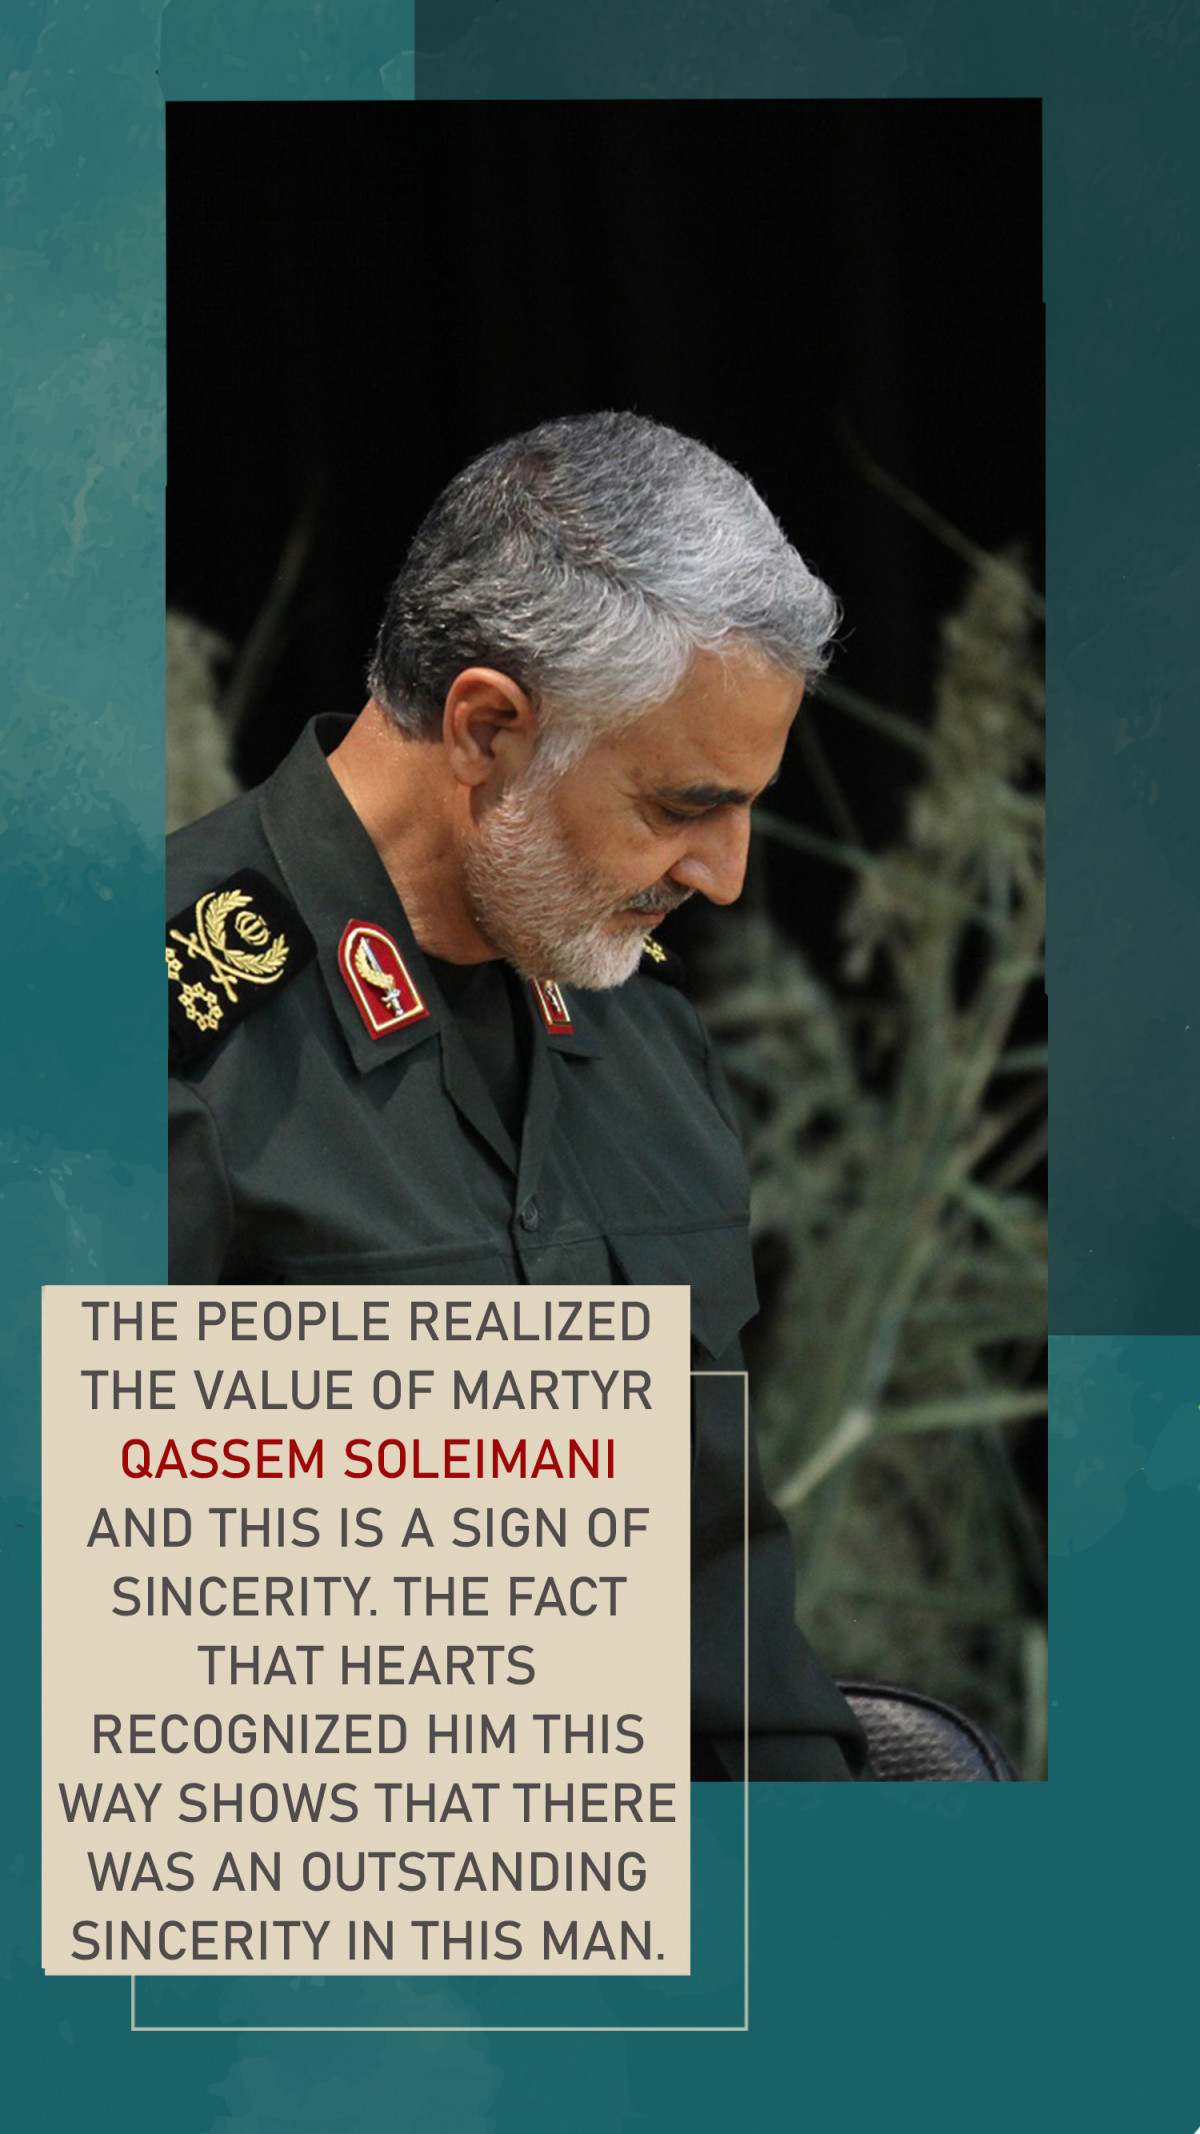 THE PEOPLE REALIZED THE VALUE OF MARTYR QASSEM SOLEIMANI